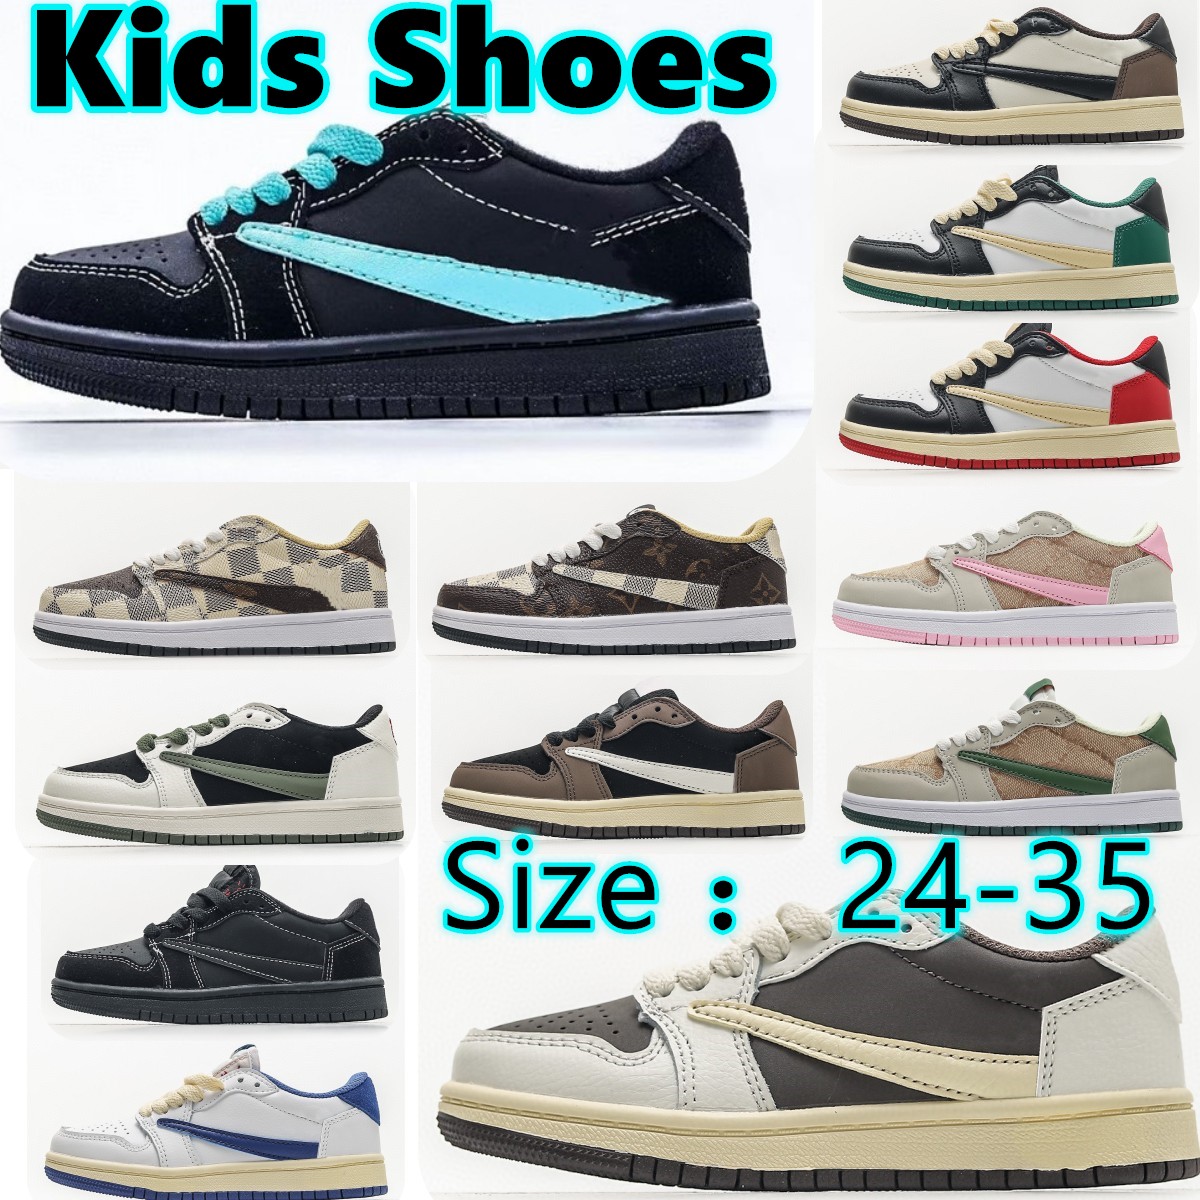 

Kids shoes Jumpman 1s 1 low toddlers boys Basketball sneakers designer Reverse Mocha Olive Black Phantom baby kid youth toddler infants trainers Athletic Shoe